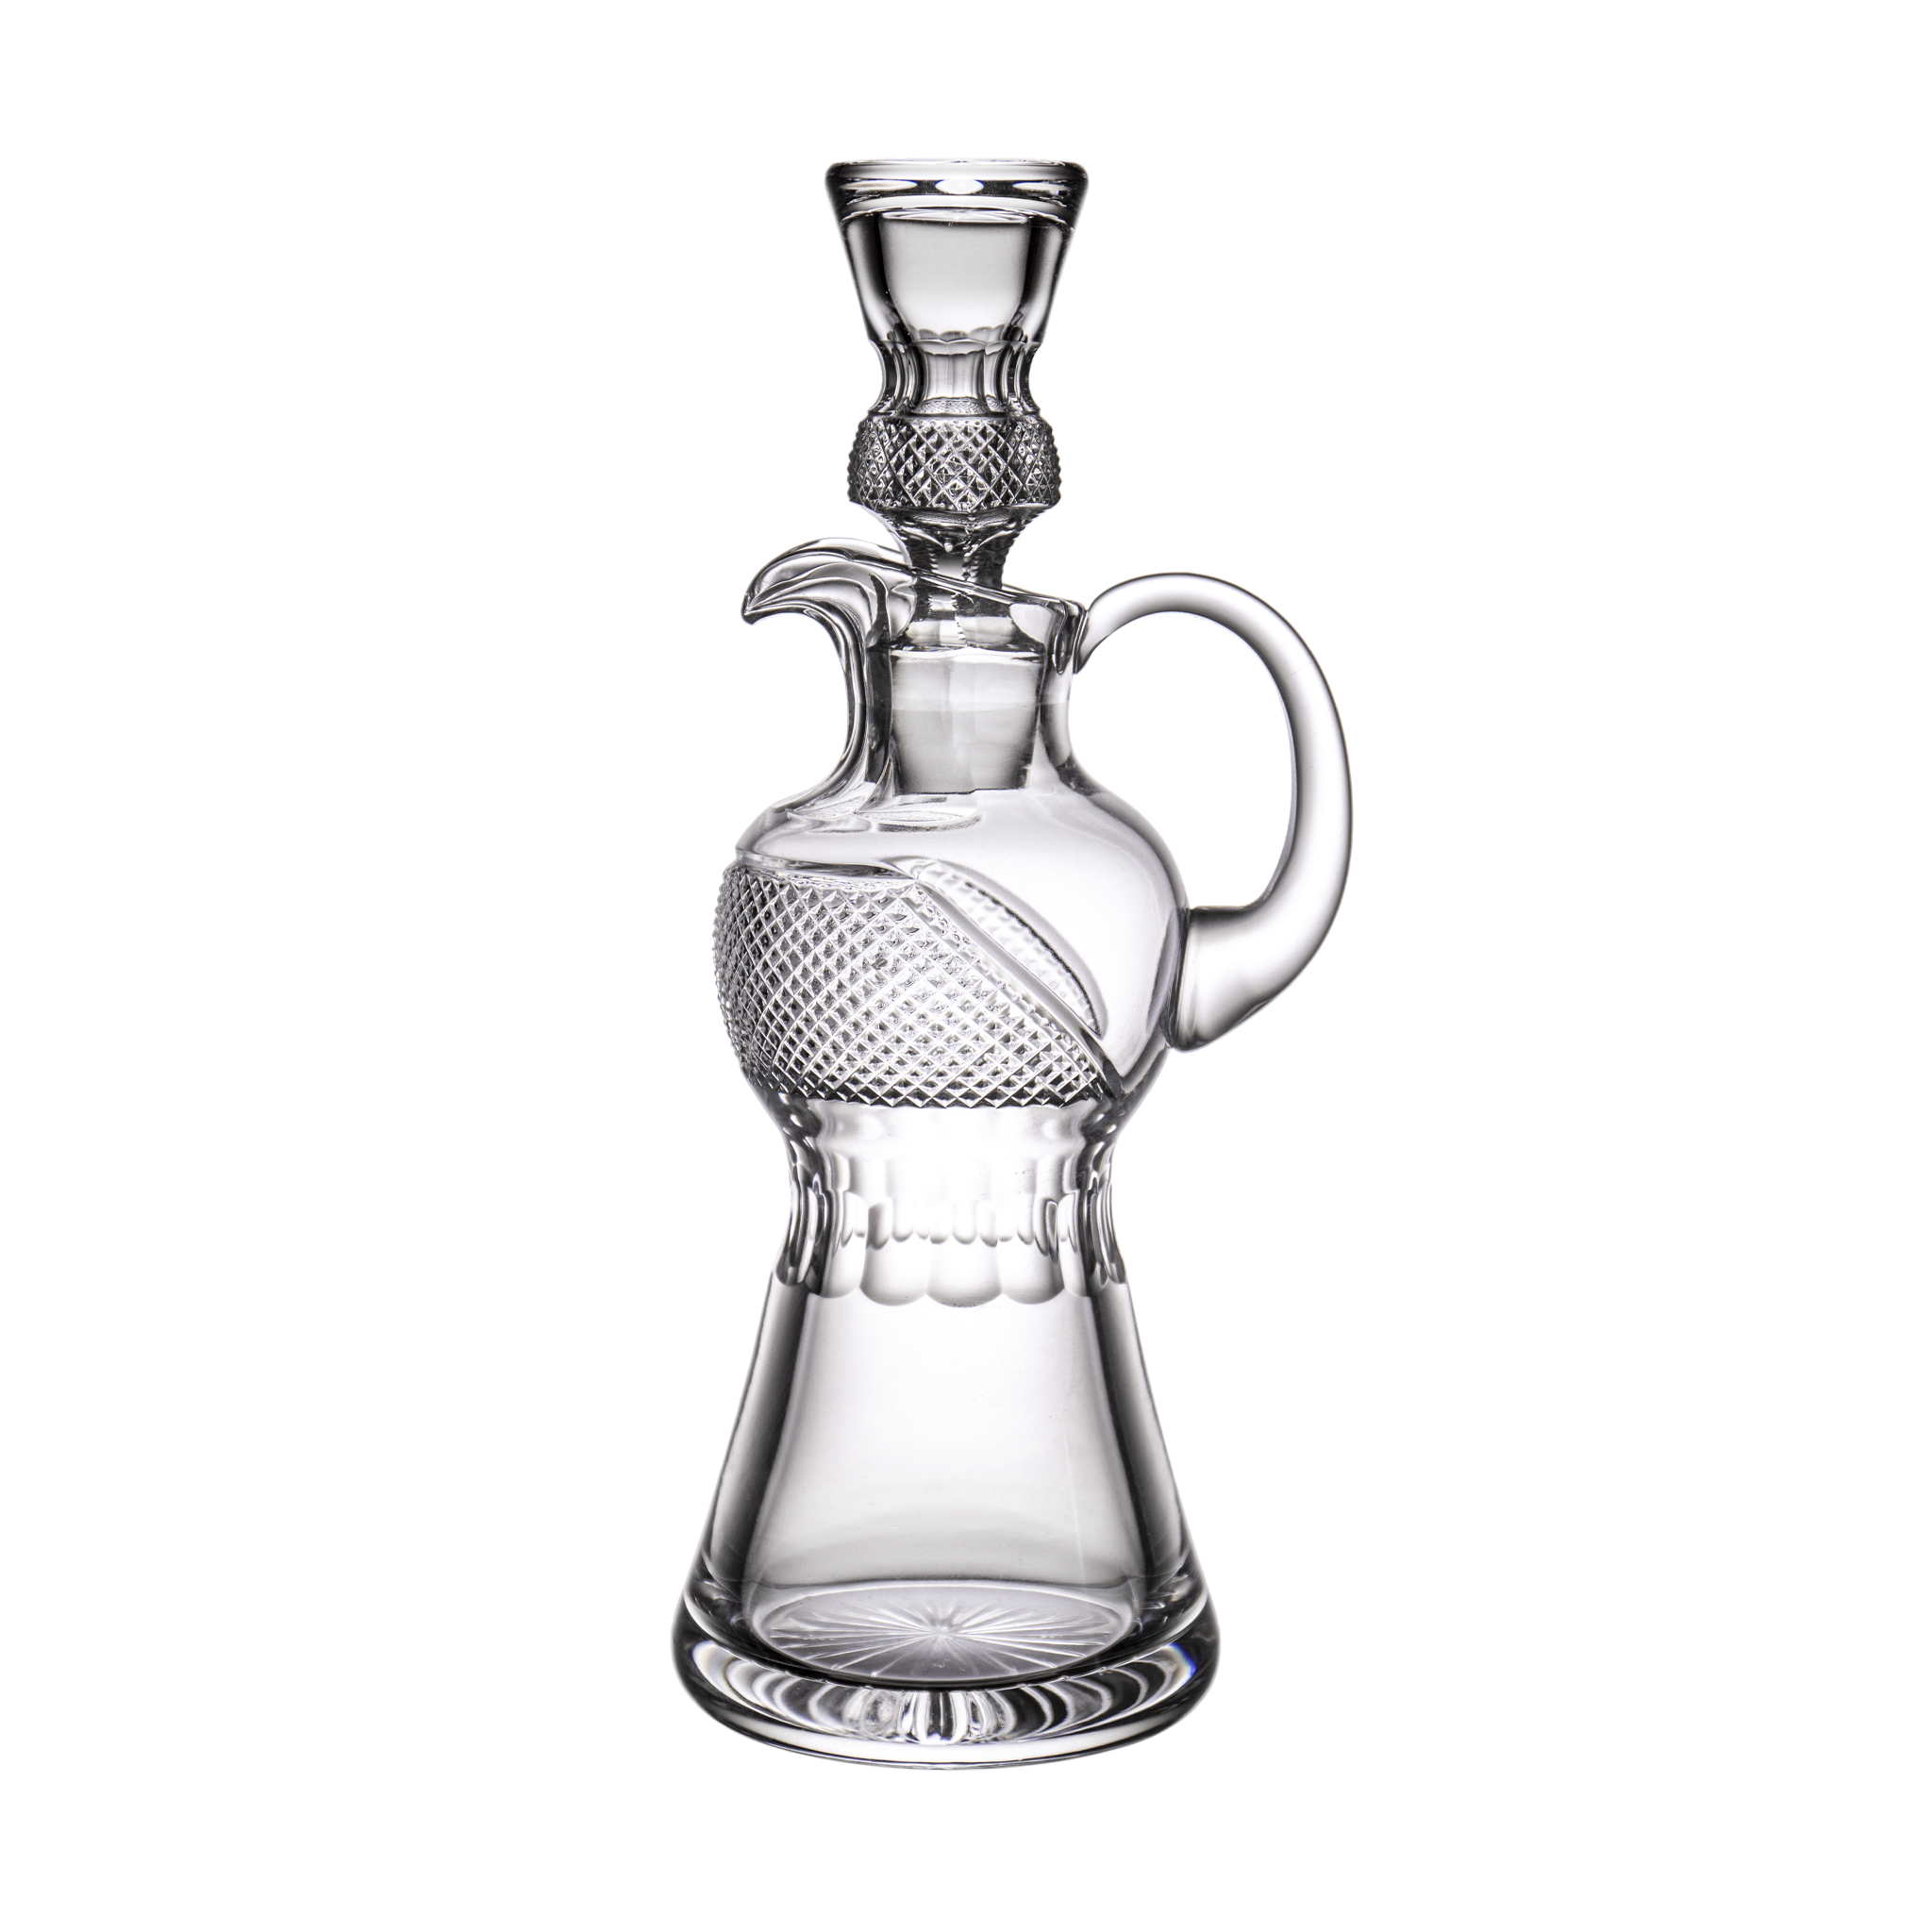 THISTLE PLATINE WINE DECANTER WITH A HANDLE